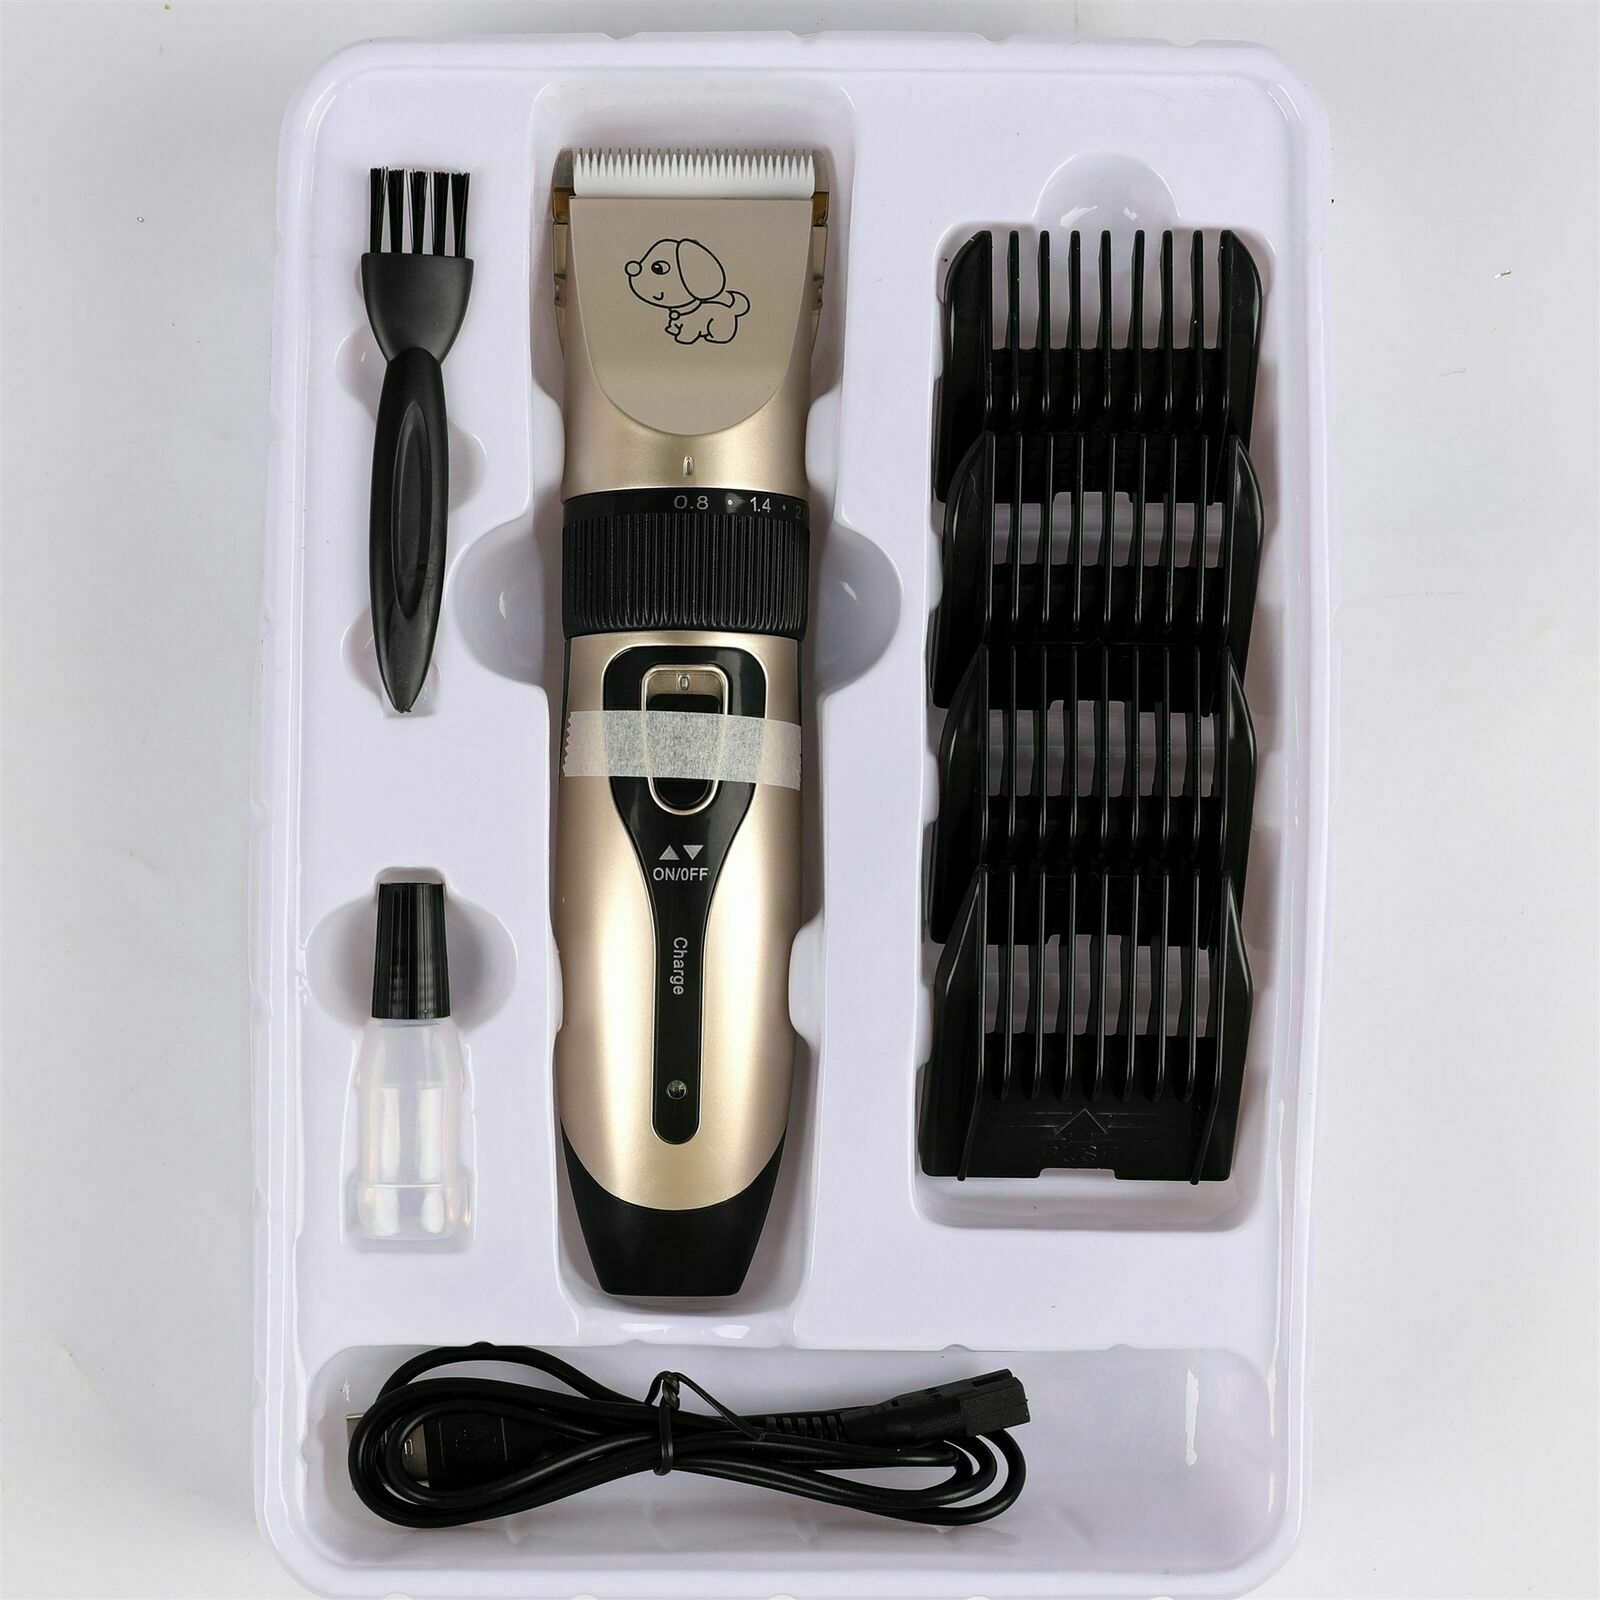 Ozoffer Pet Grooming Electric Dog Clipper Comb Set Hair Trimmer Blade Cat Horse Cordless